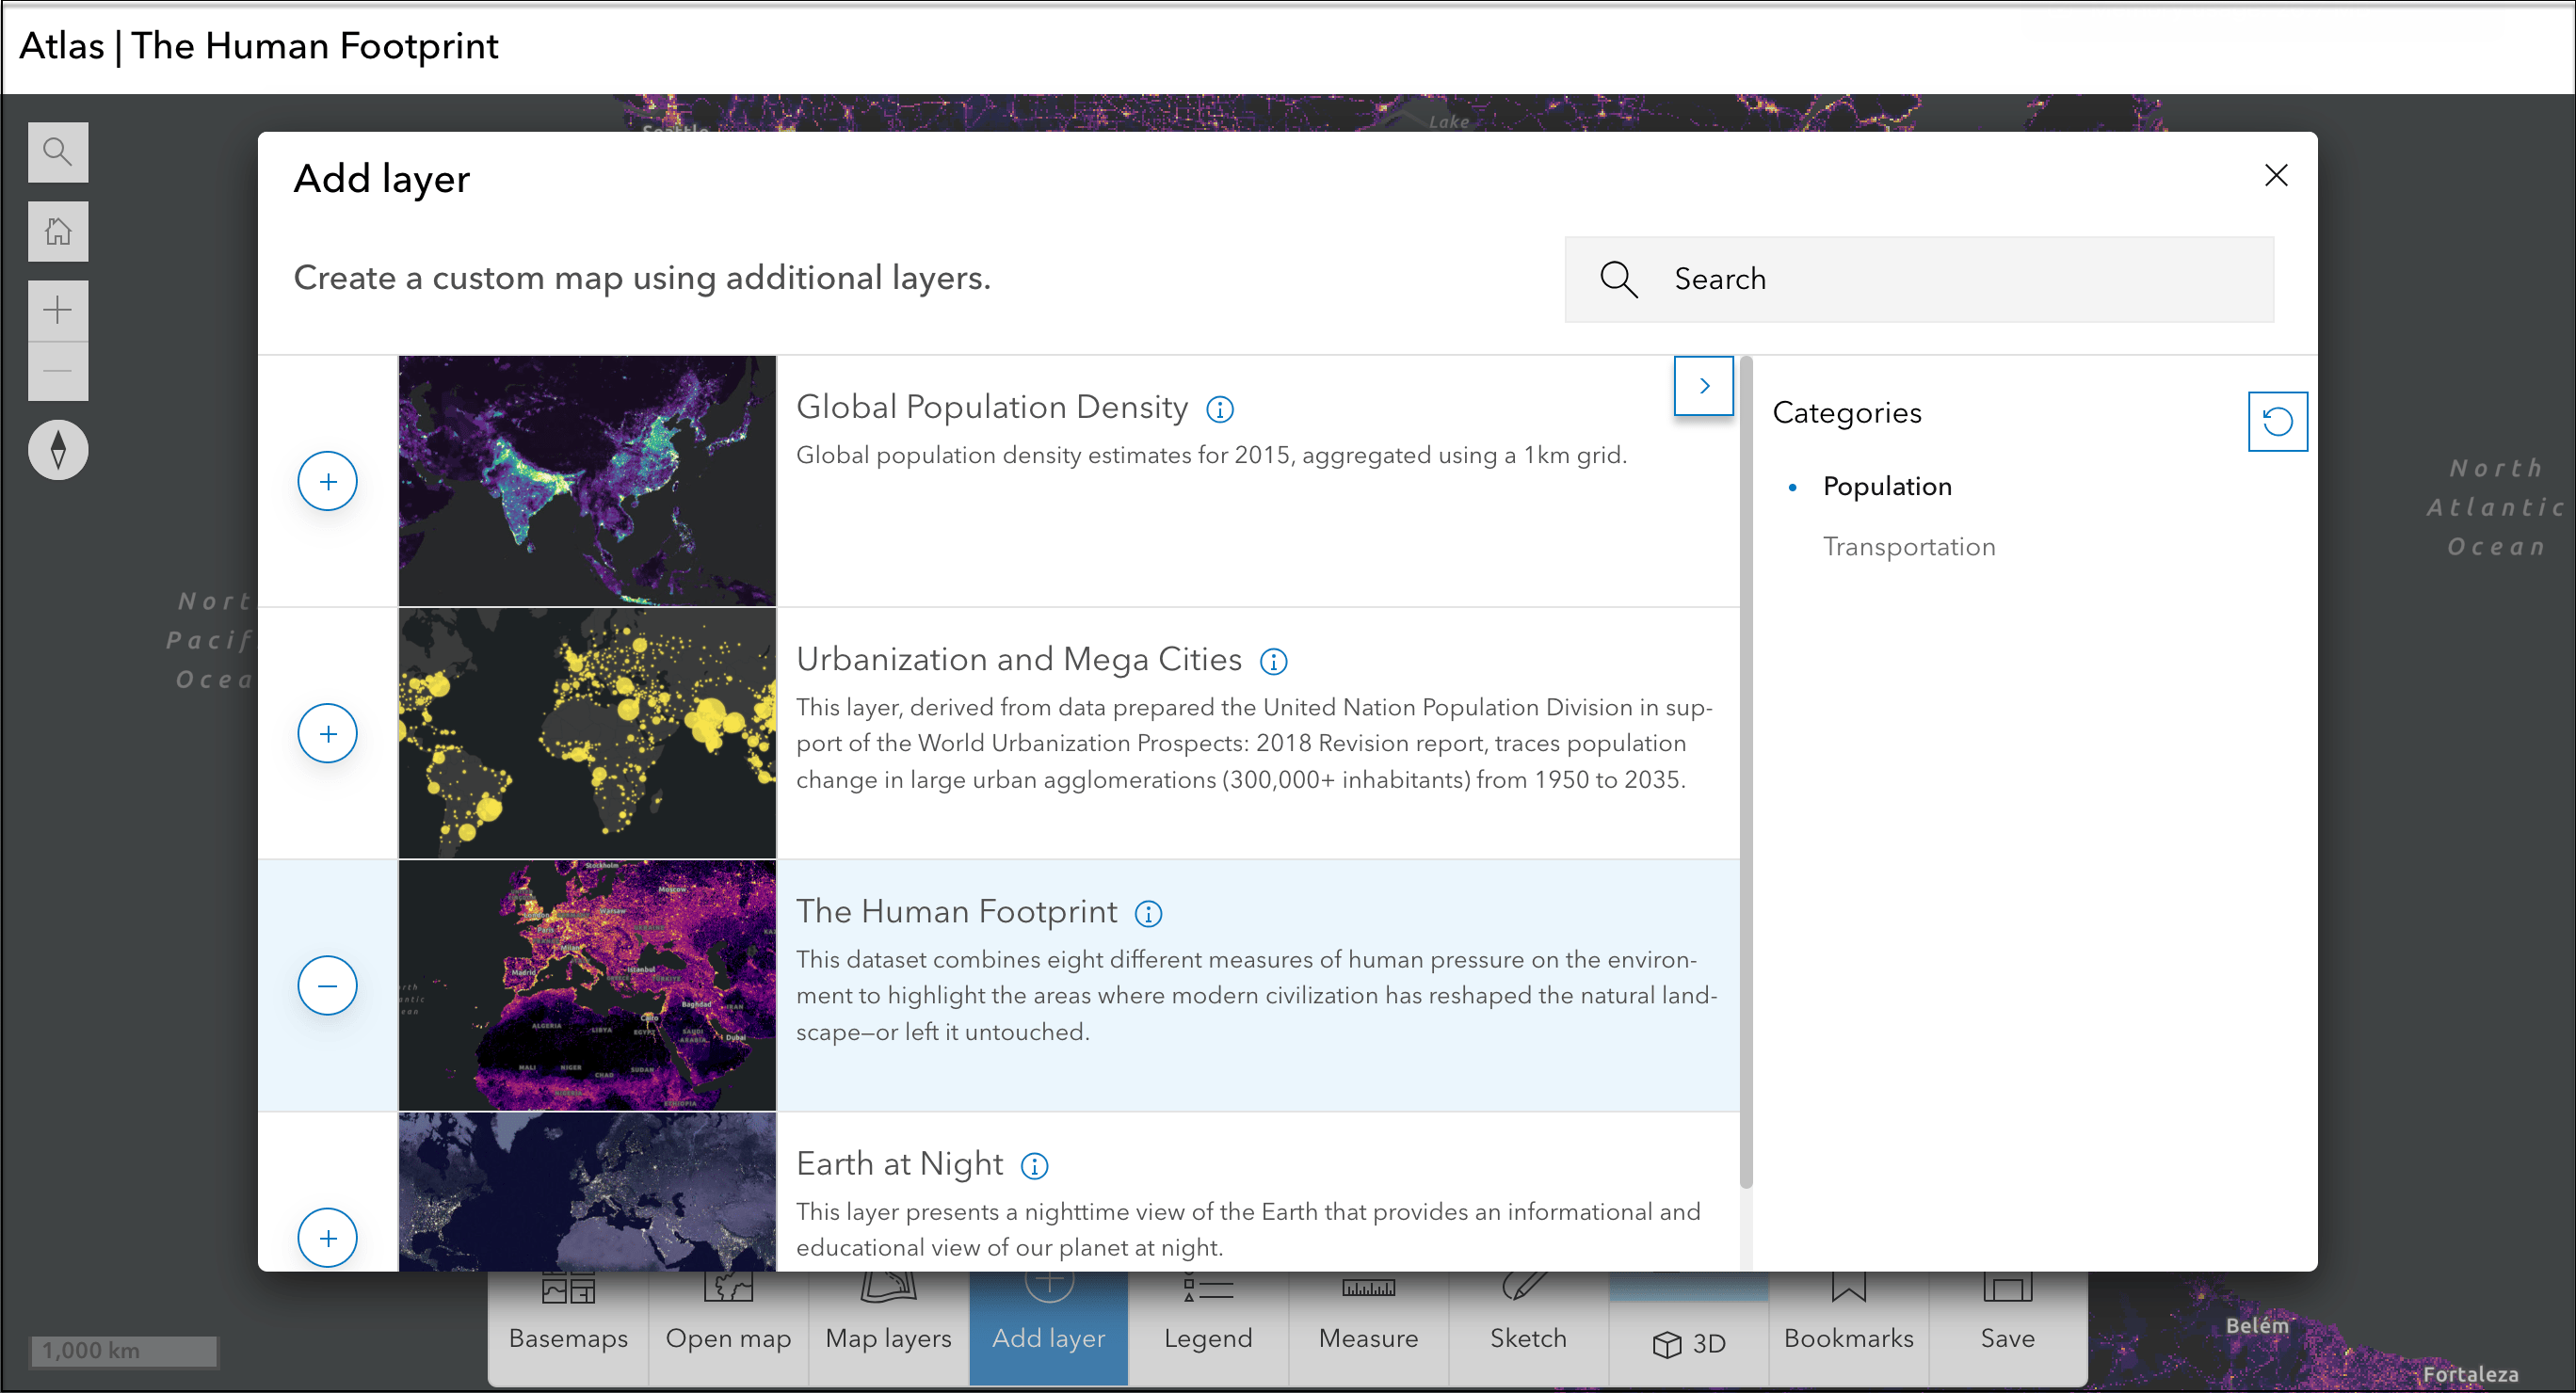 Image of Add layers panel in Atlas